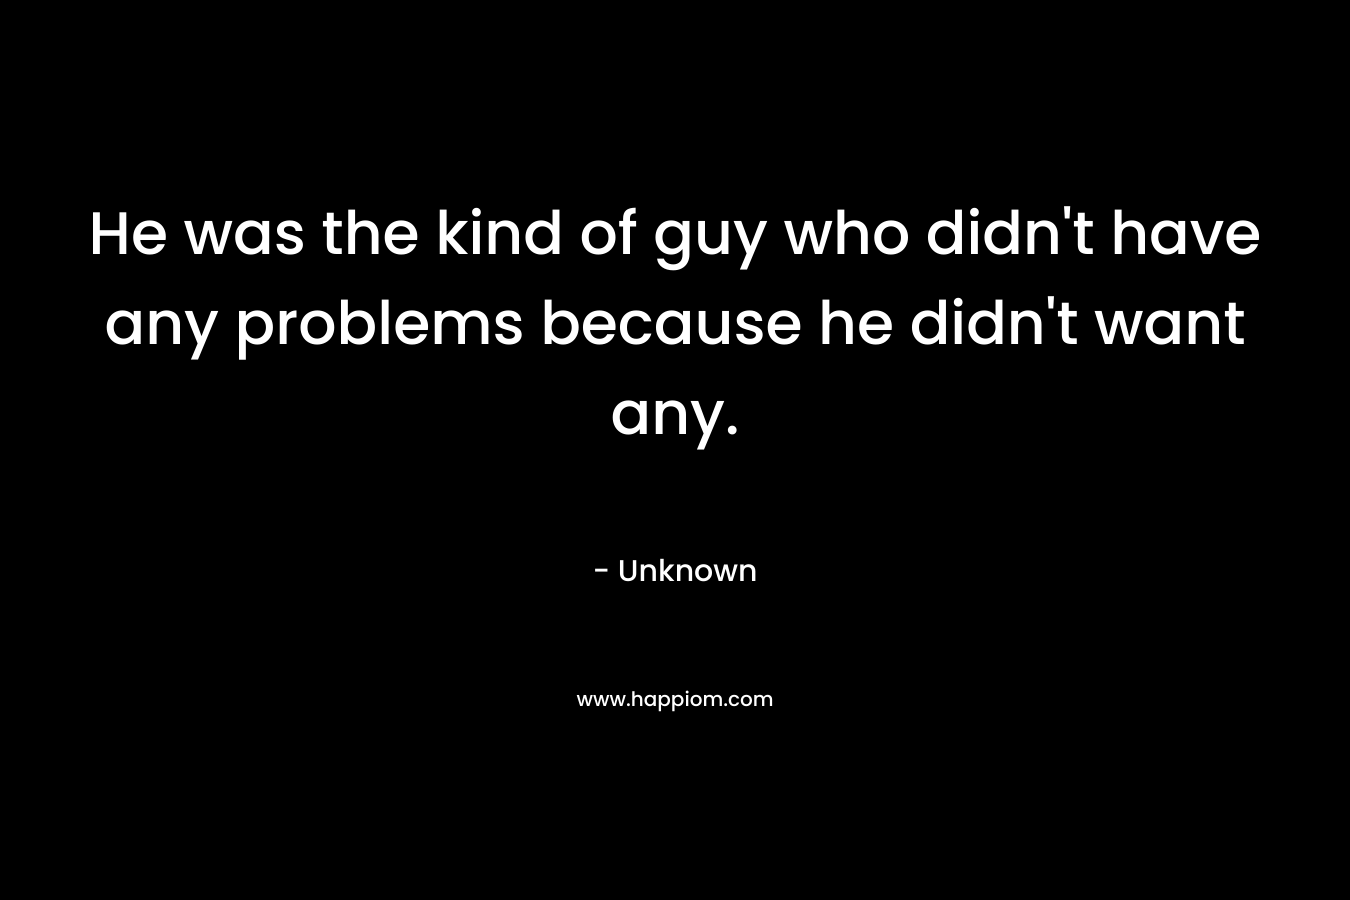 He was the kind of guy who didn’t have any problems because he didn’t want any. – Unknown